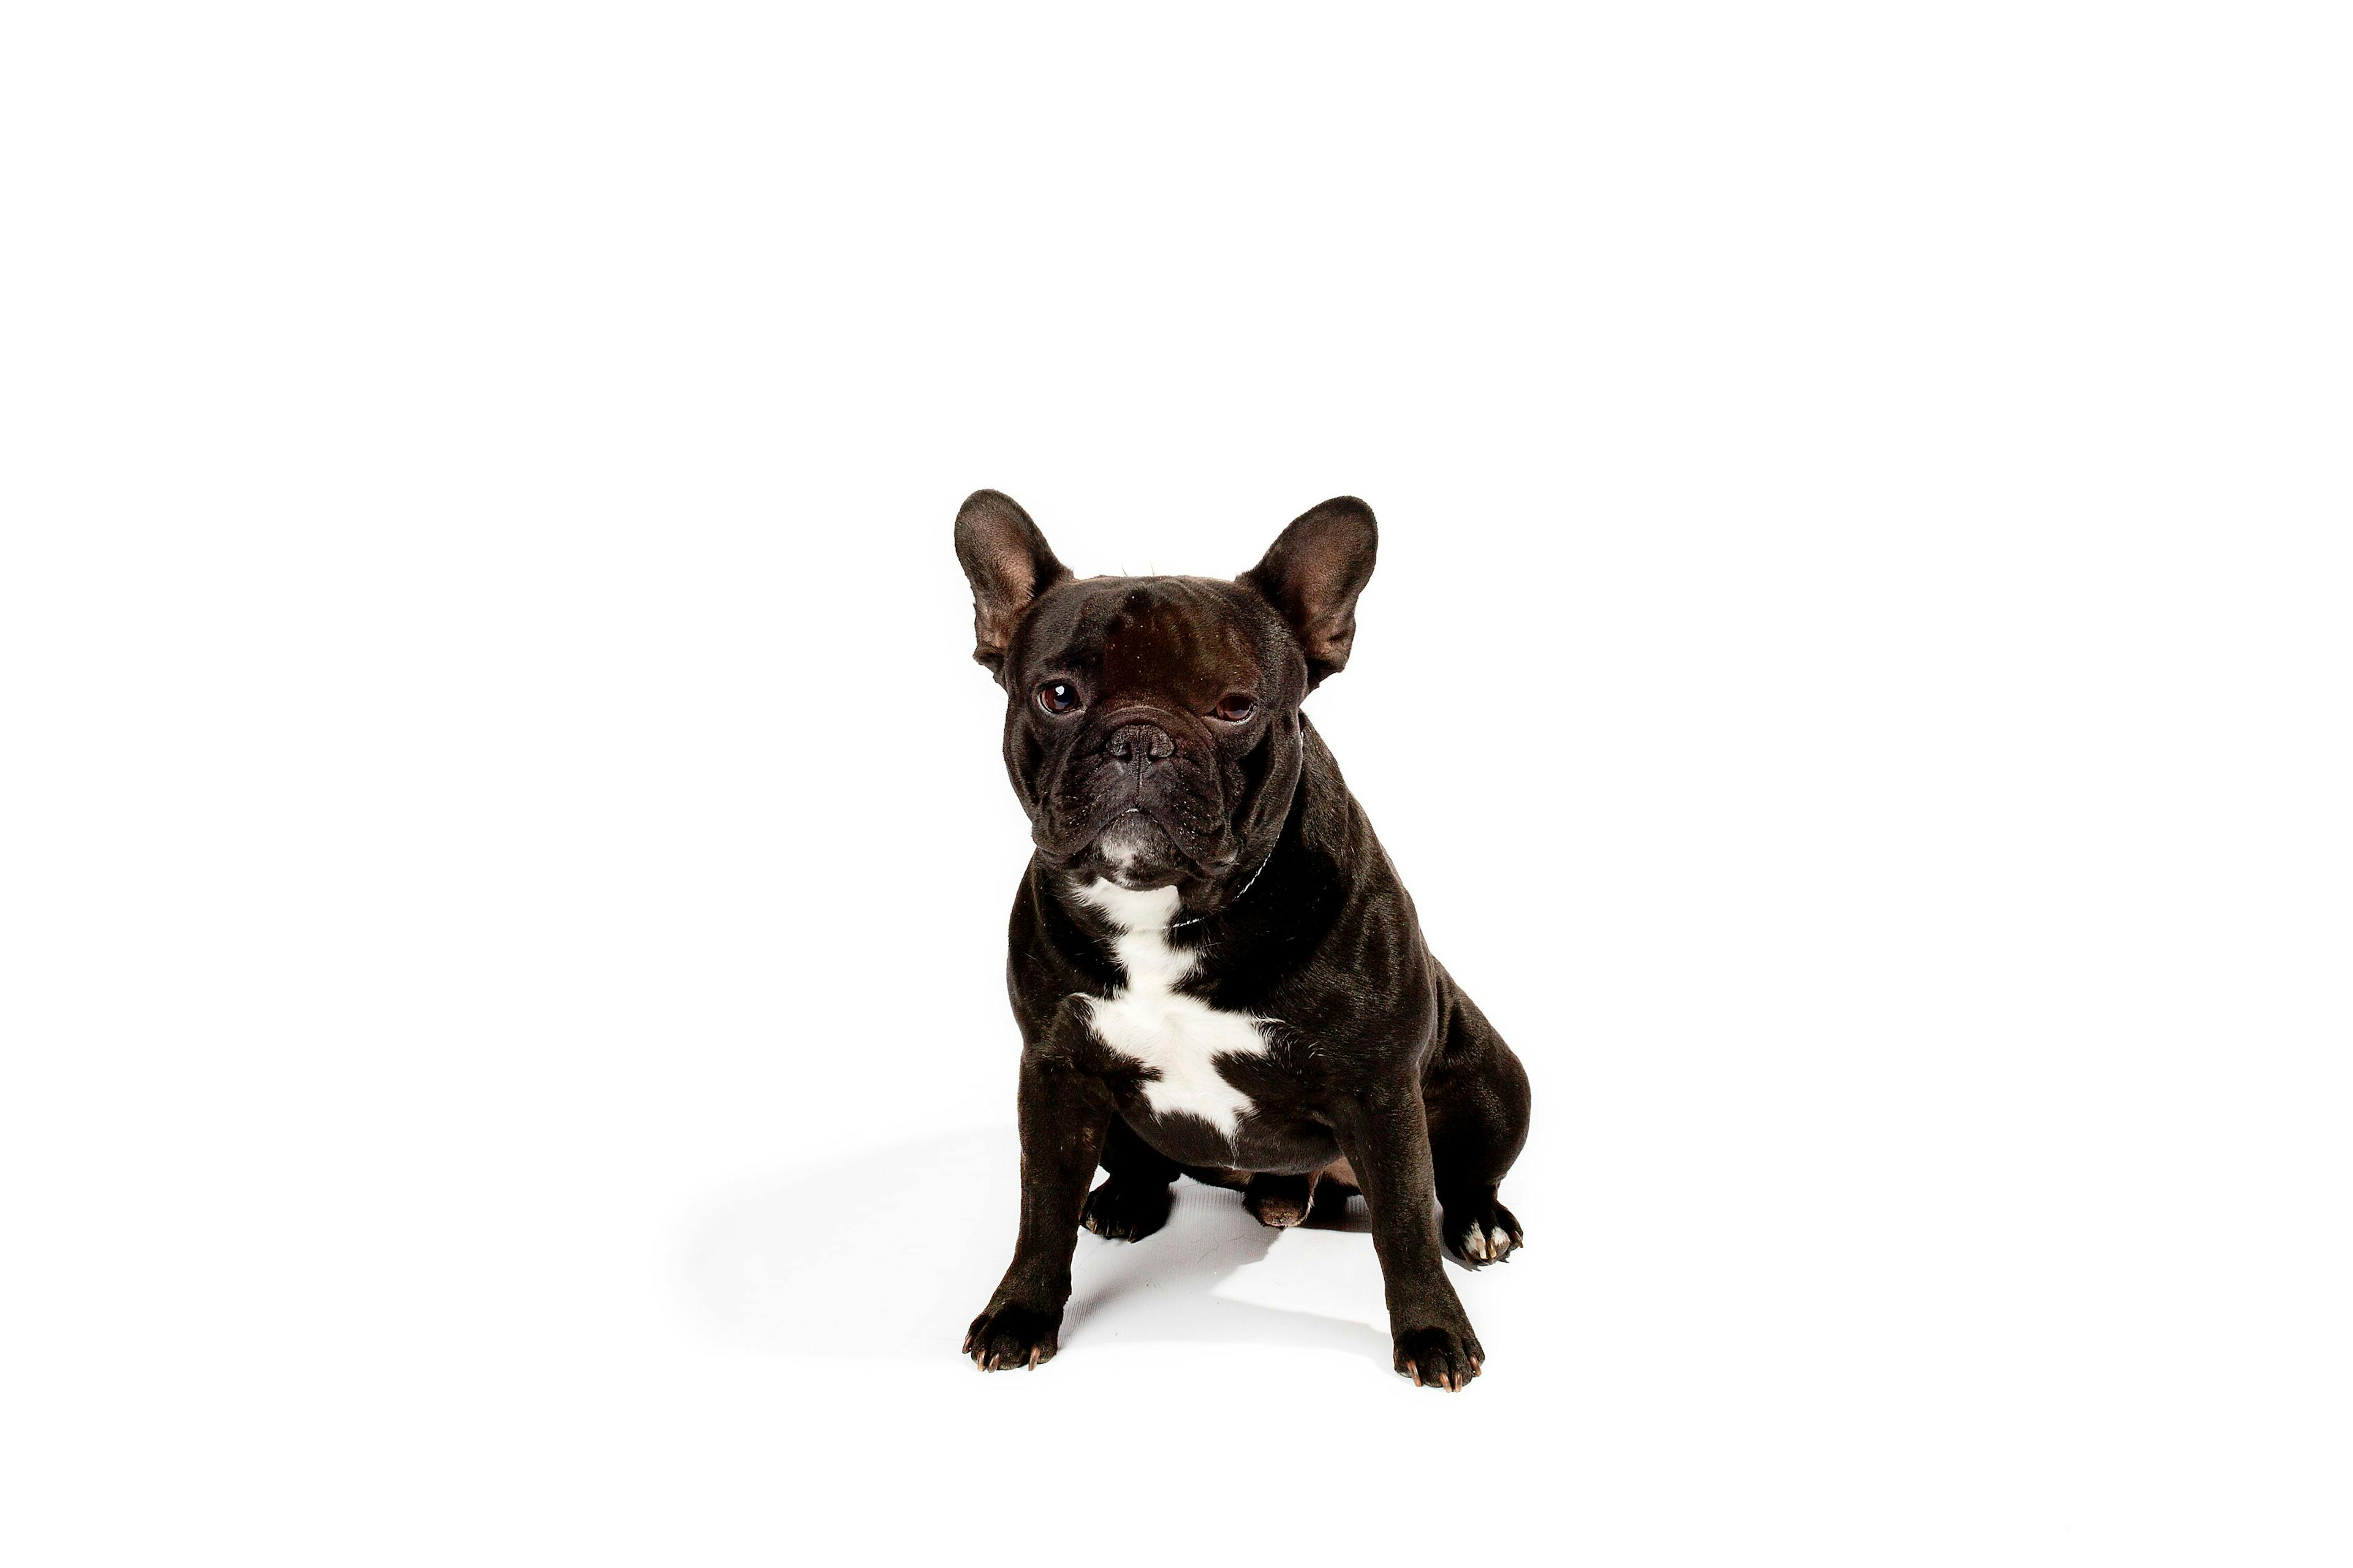 French bulldogs, most popular dog breed for the second year in a row